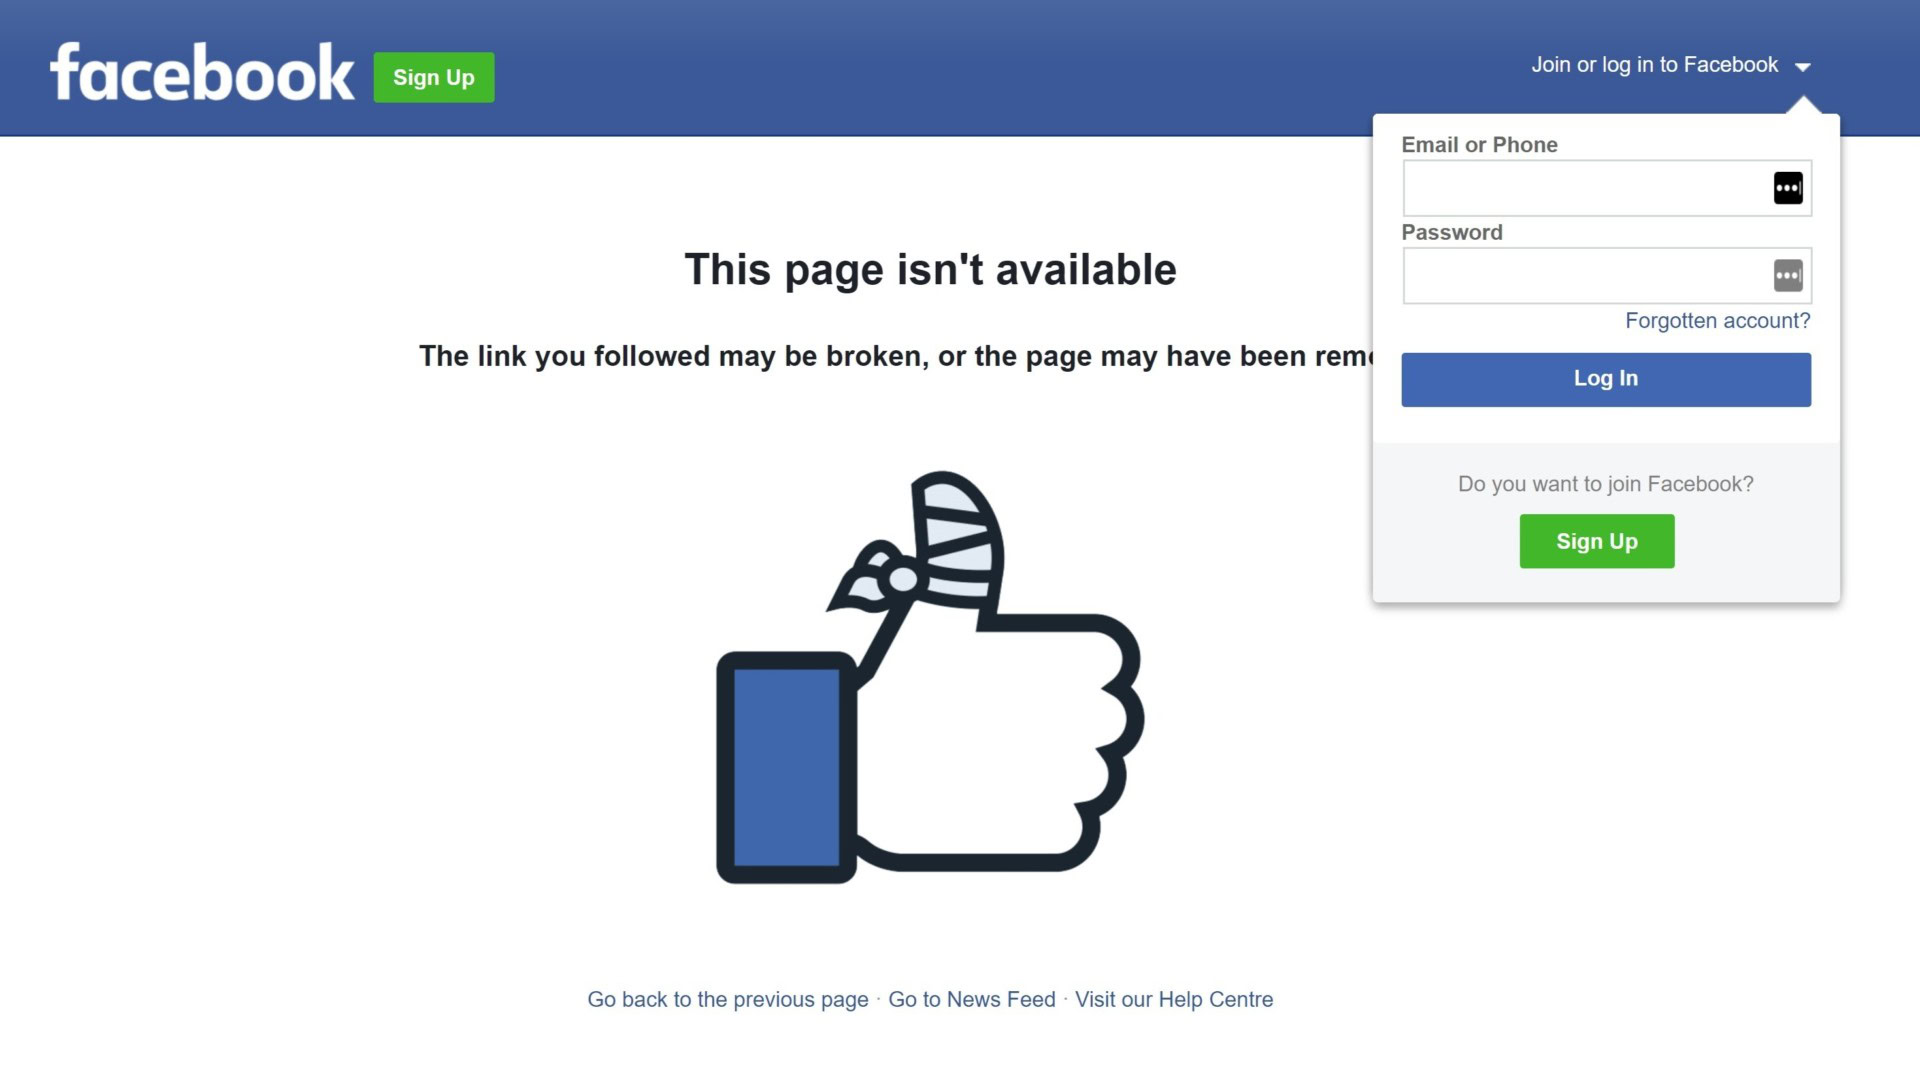 Facebook Login switches to HTTPS for all accounts starting October 6